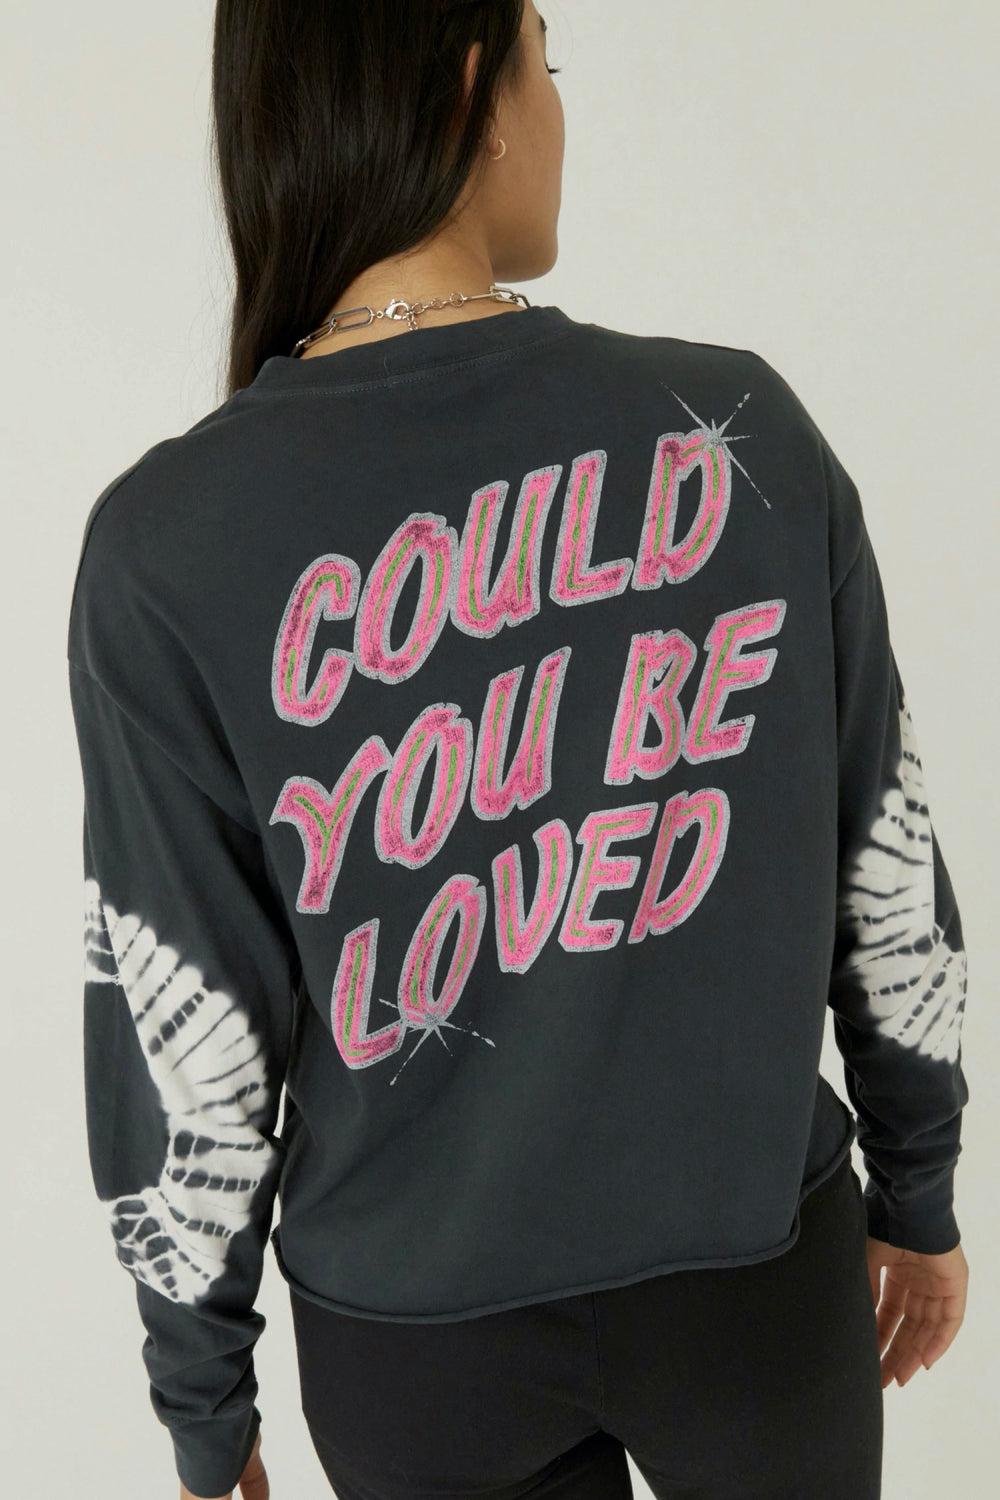 Bob Marley Could You Be Loved Oversized L/S Tee